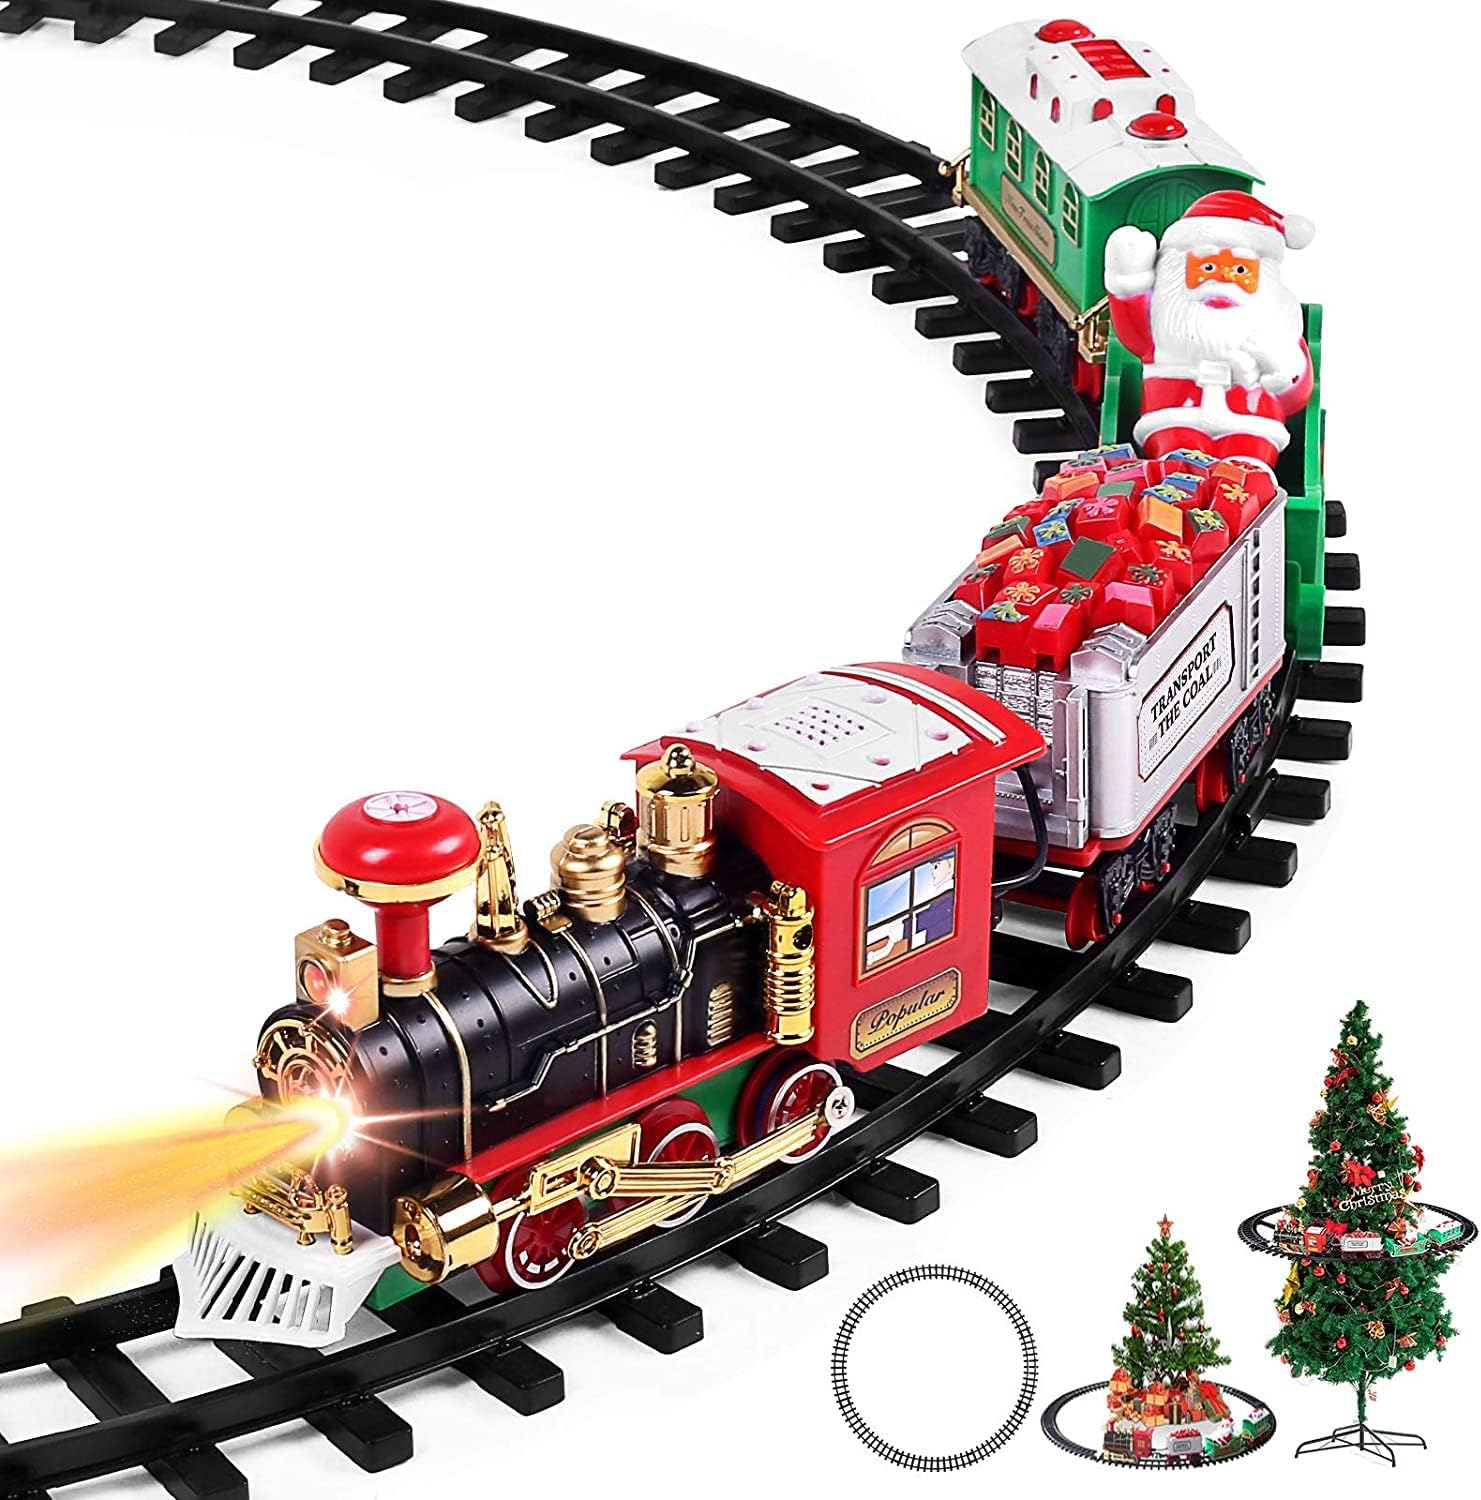 We bought this for our son and he loves it every time we turn it on. He loves to look at the train going around. This was a little complicated to install because it took some time and it is loud. But other than that, I would say its a pretty good fit to the tree.